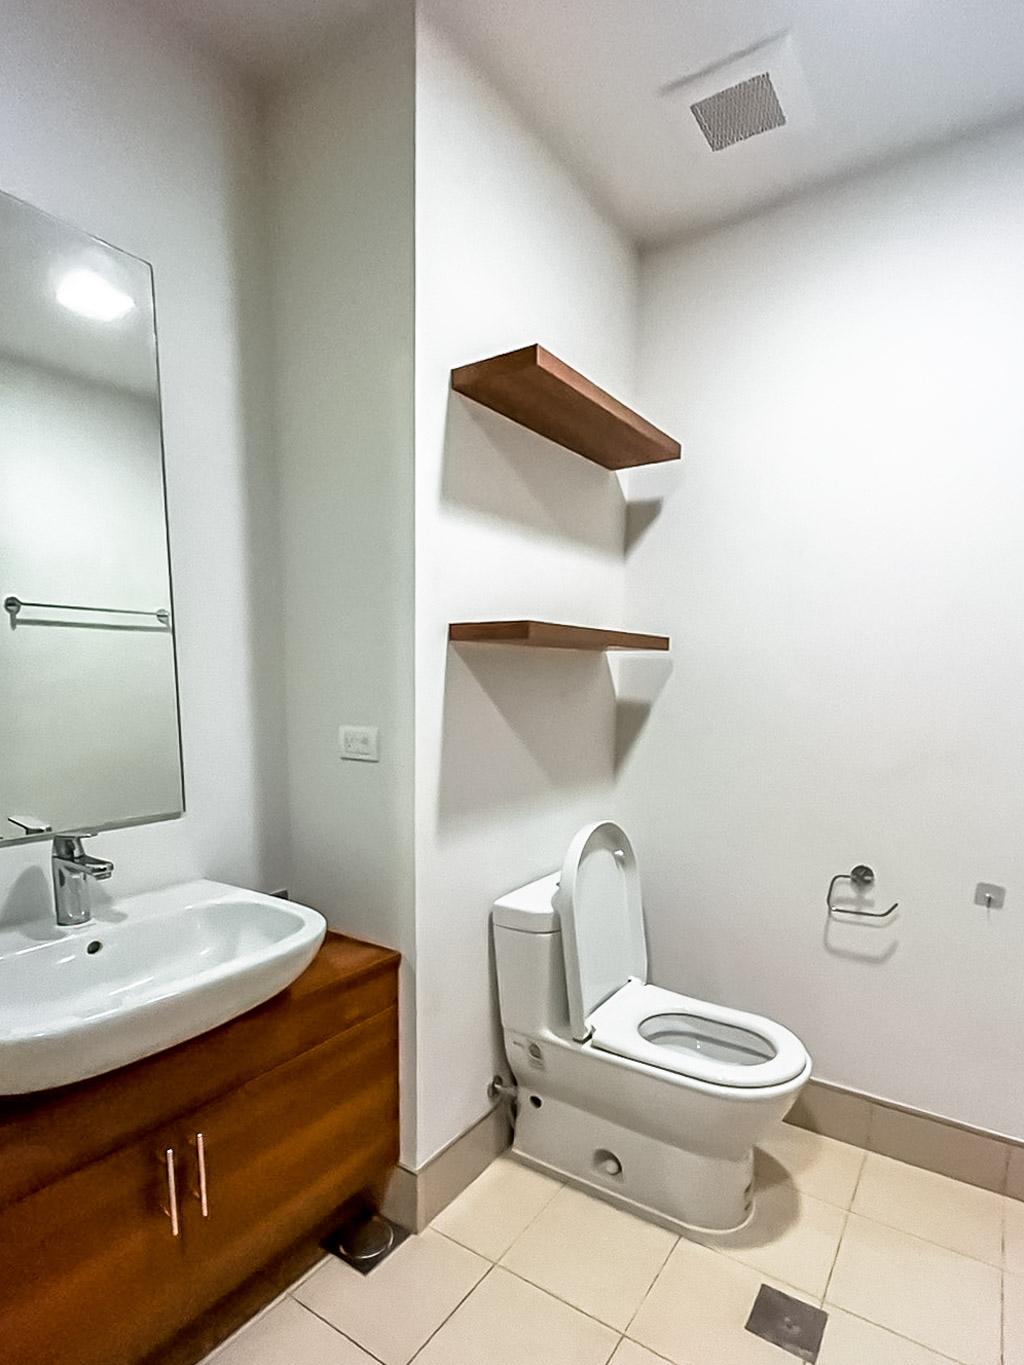 RCALC9 Furnished 2 Bedroom Condo for Rent in Cebu Business Park - 15